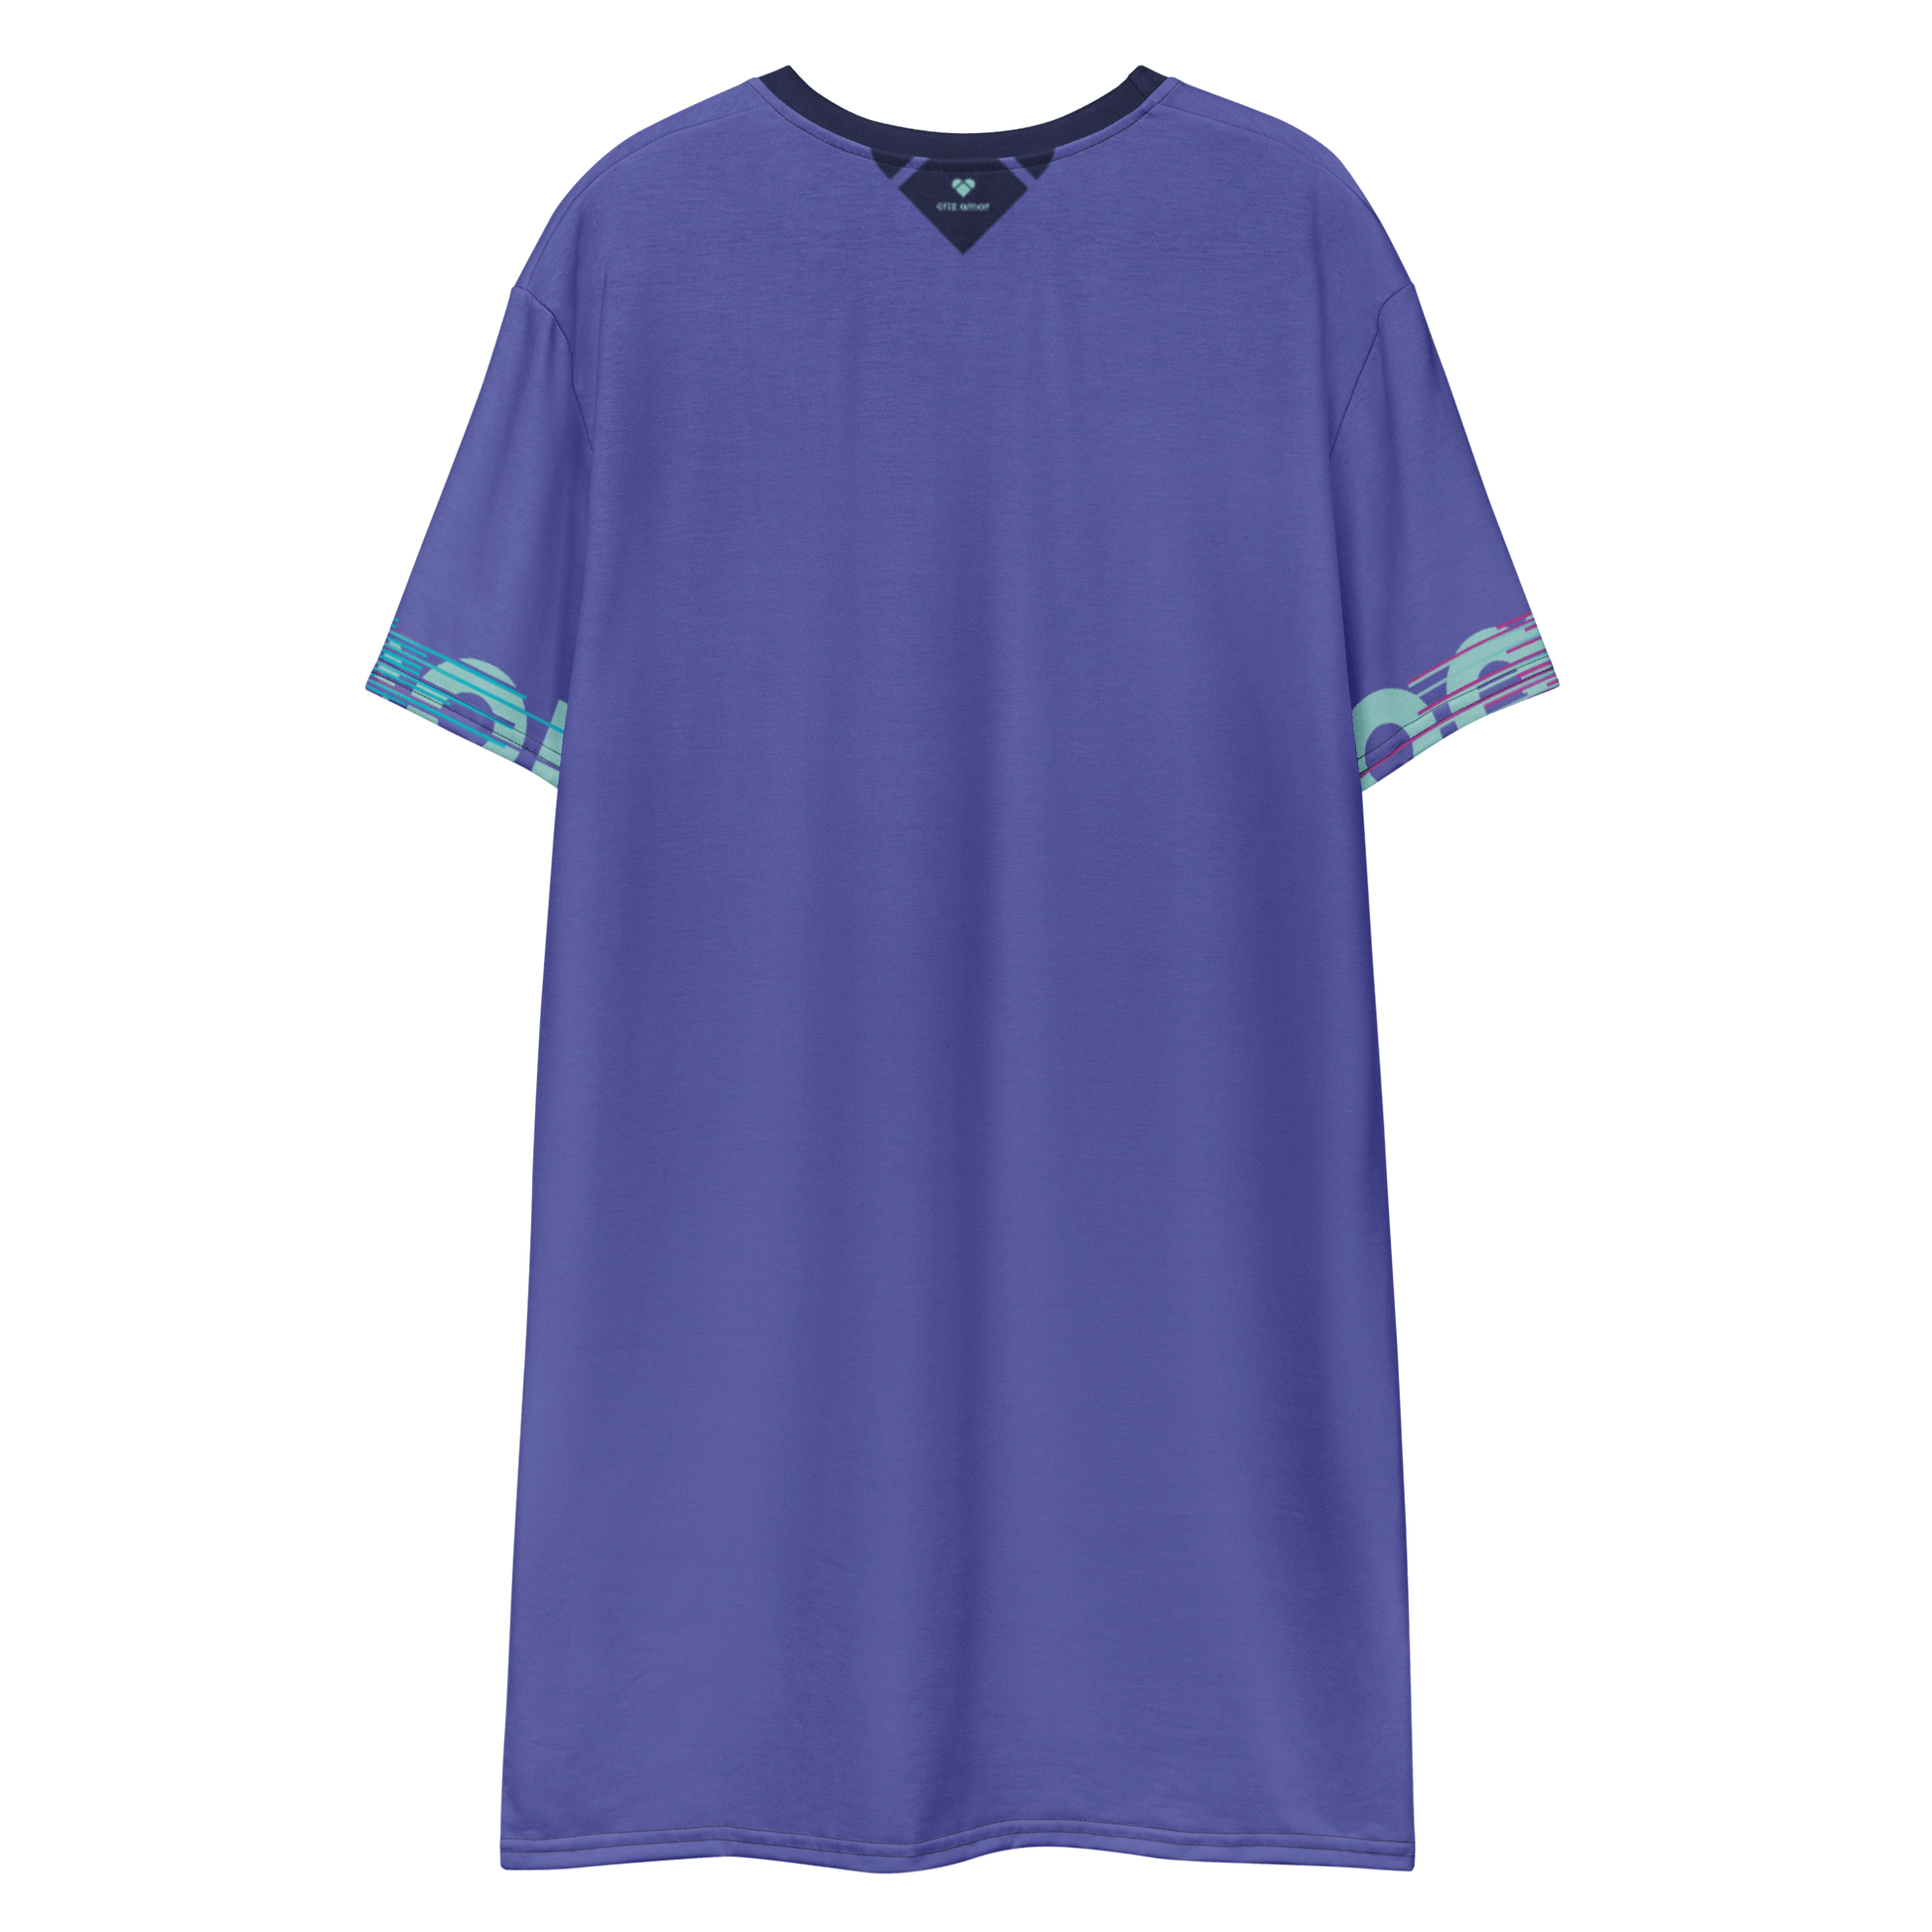 women's shirt in periwinkle with Amor branding